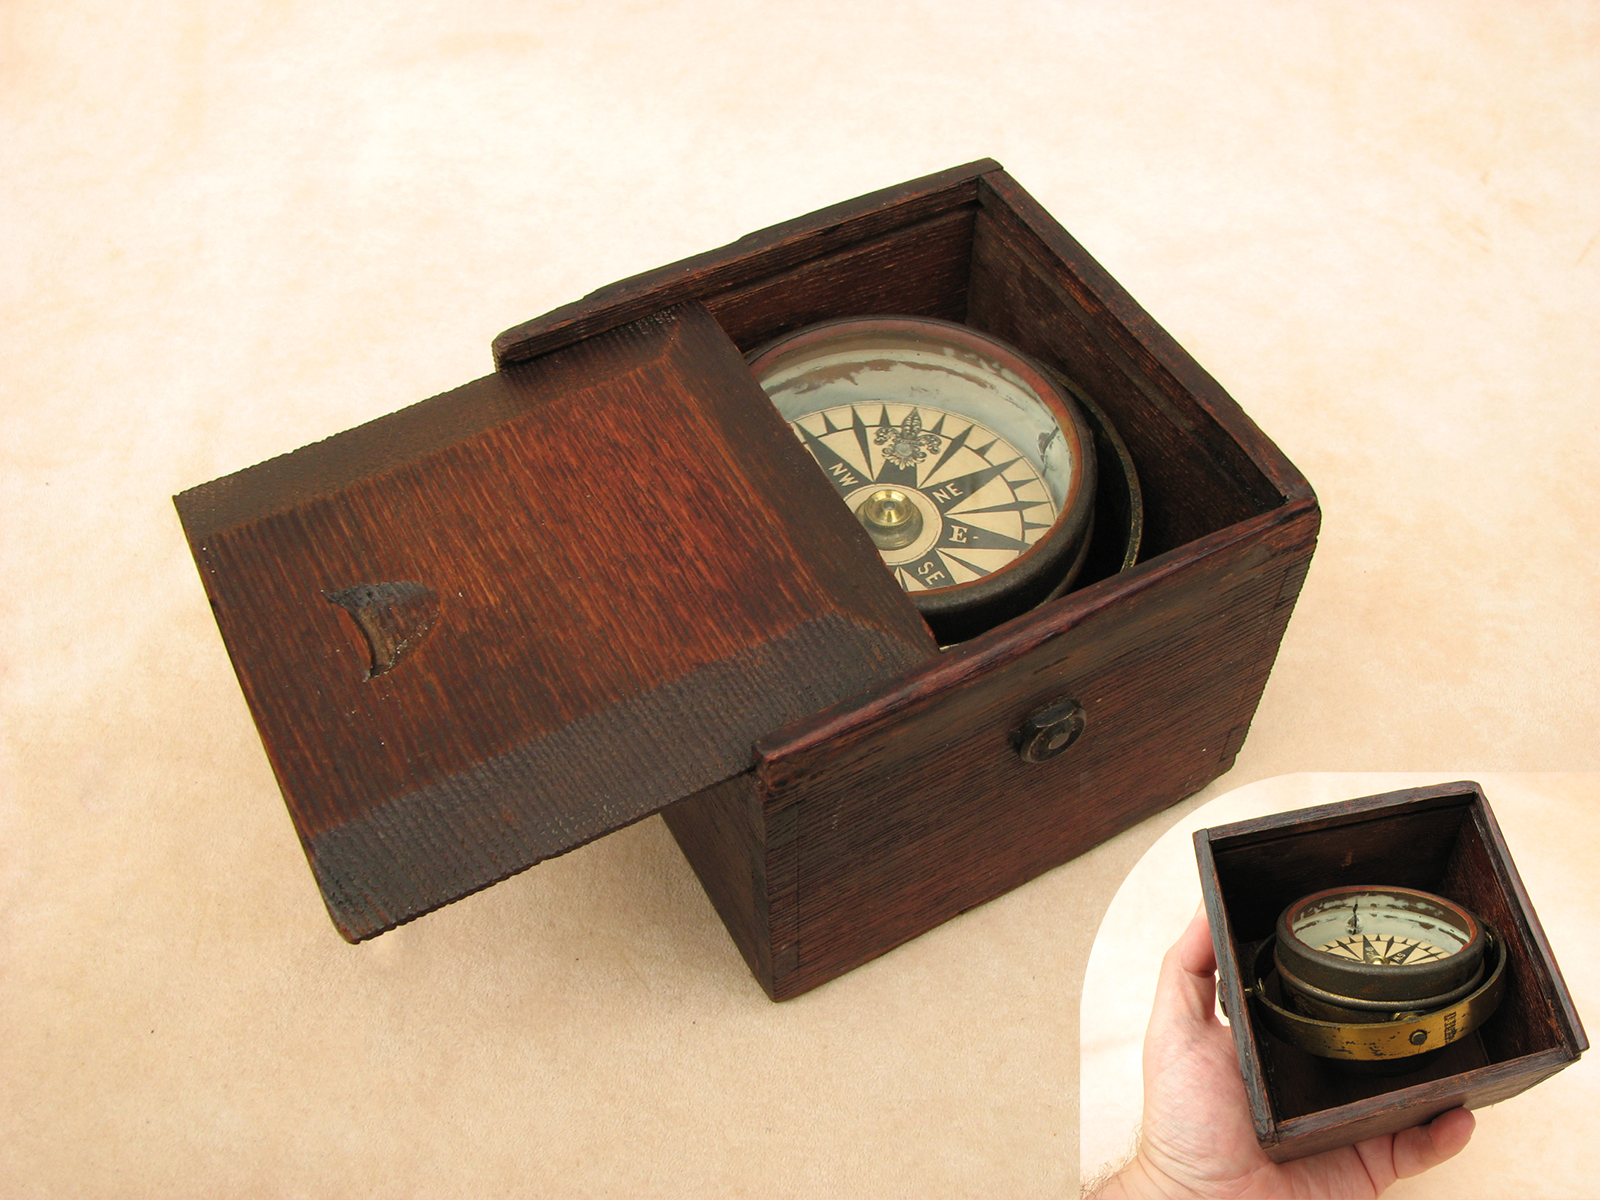 19th century Mariners gimbal compass mounted in mahogany case